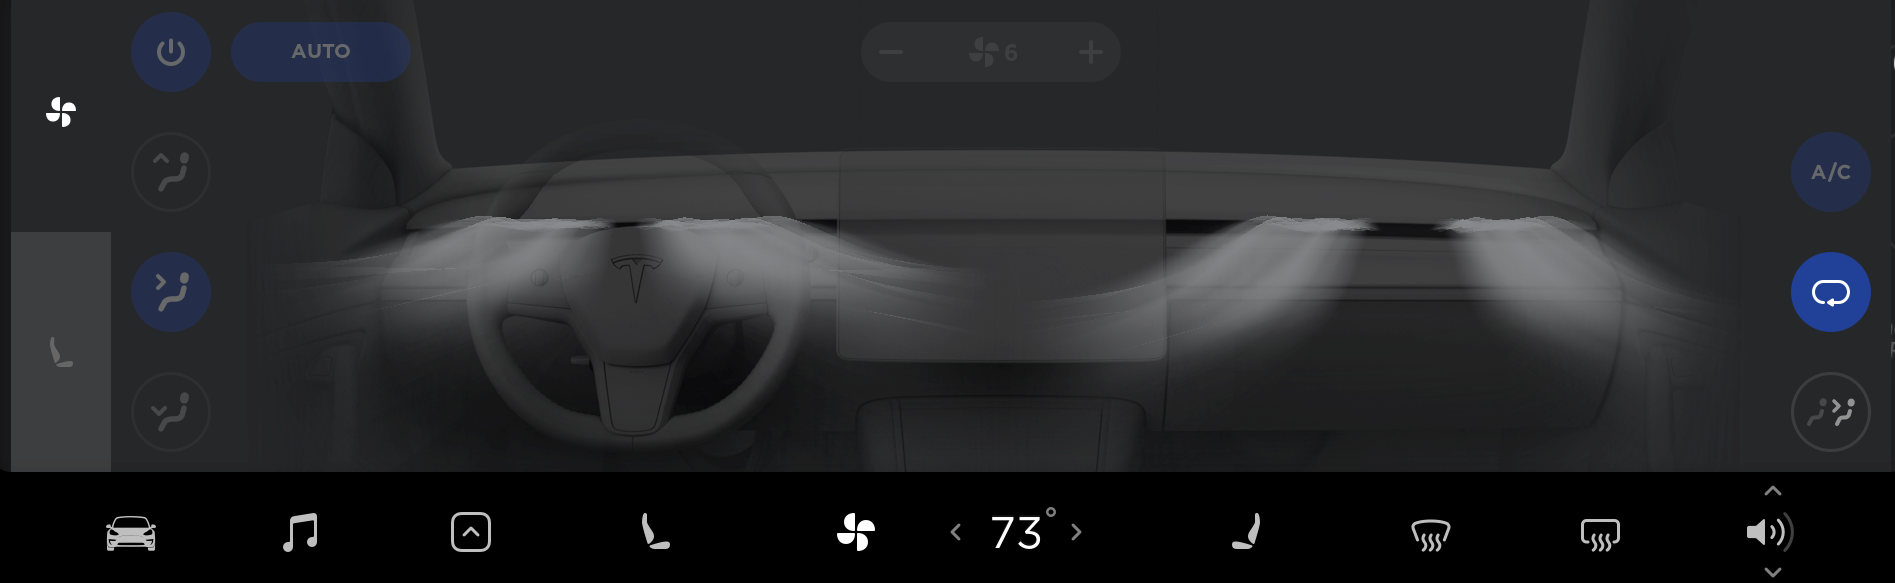 Tesla Climate Control feature in update 2018.42.2